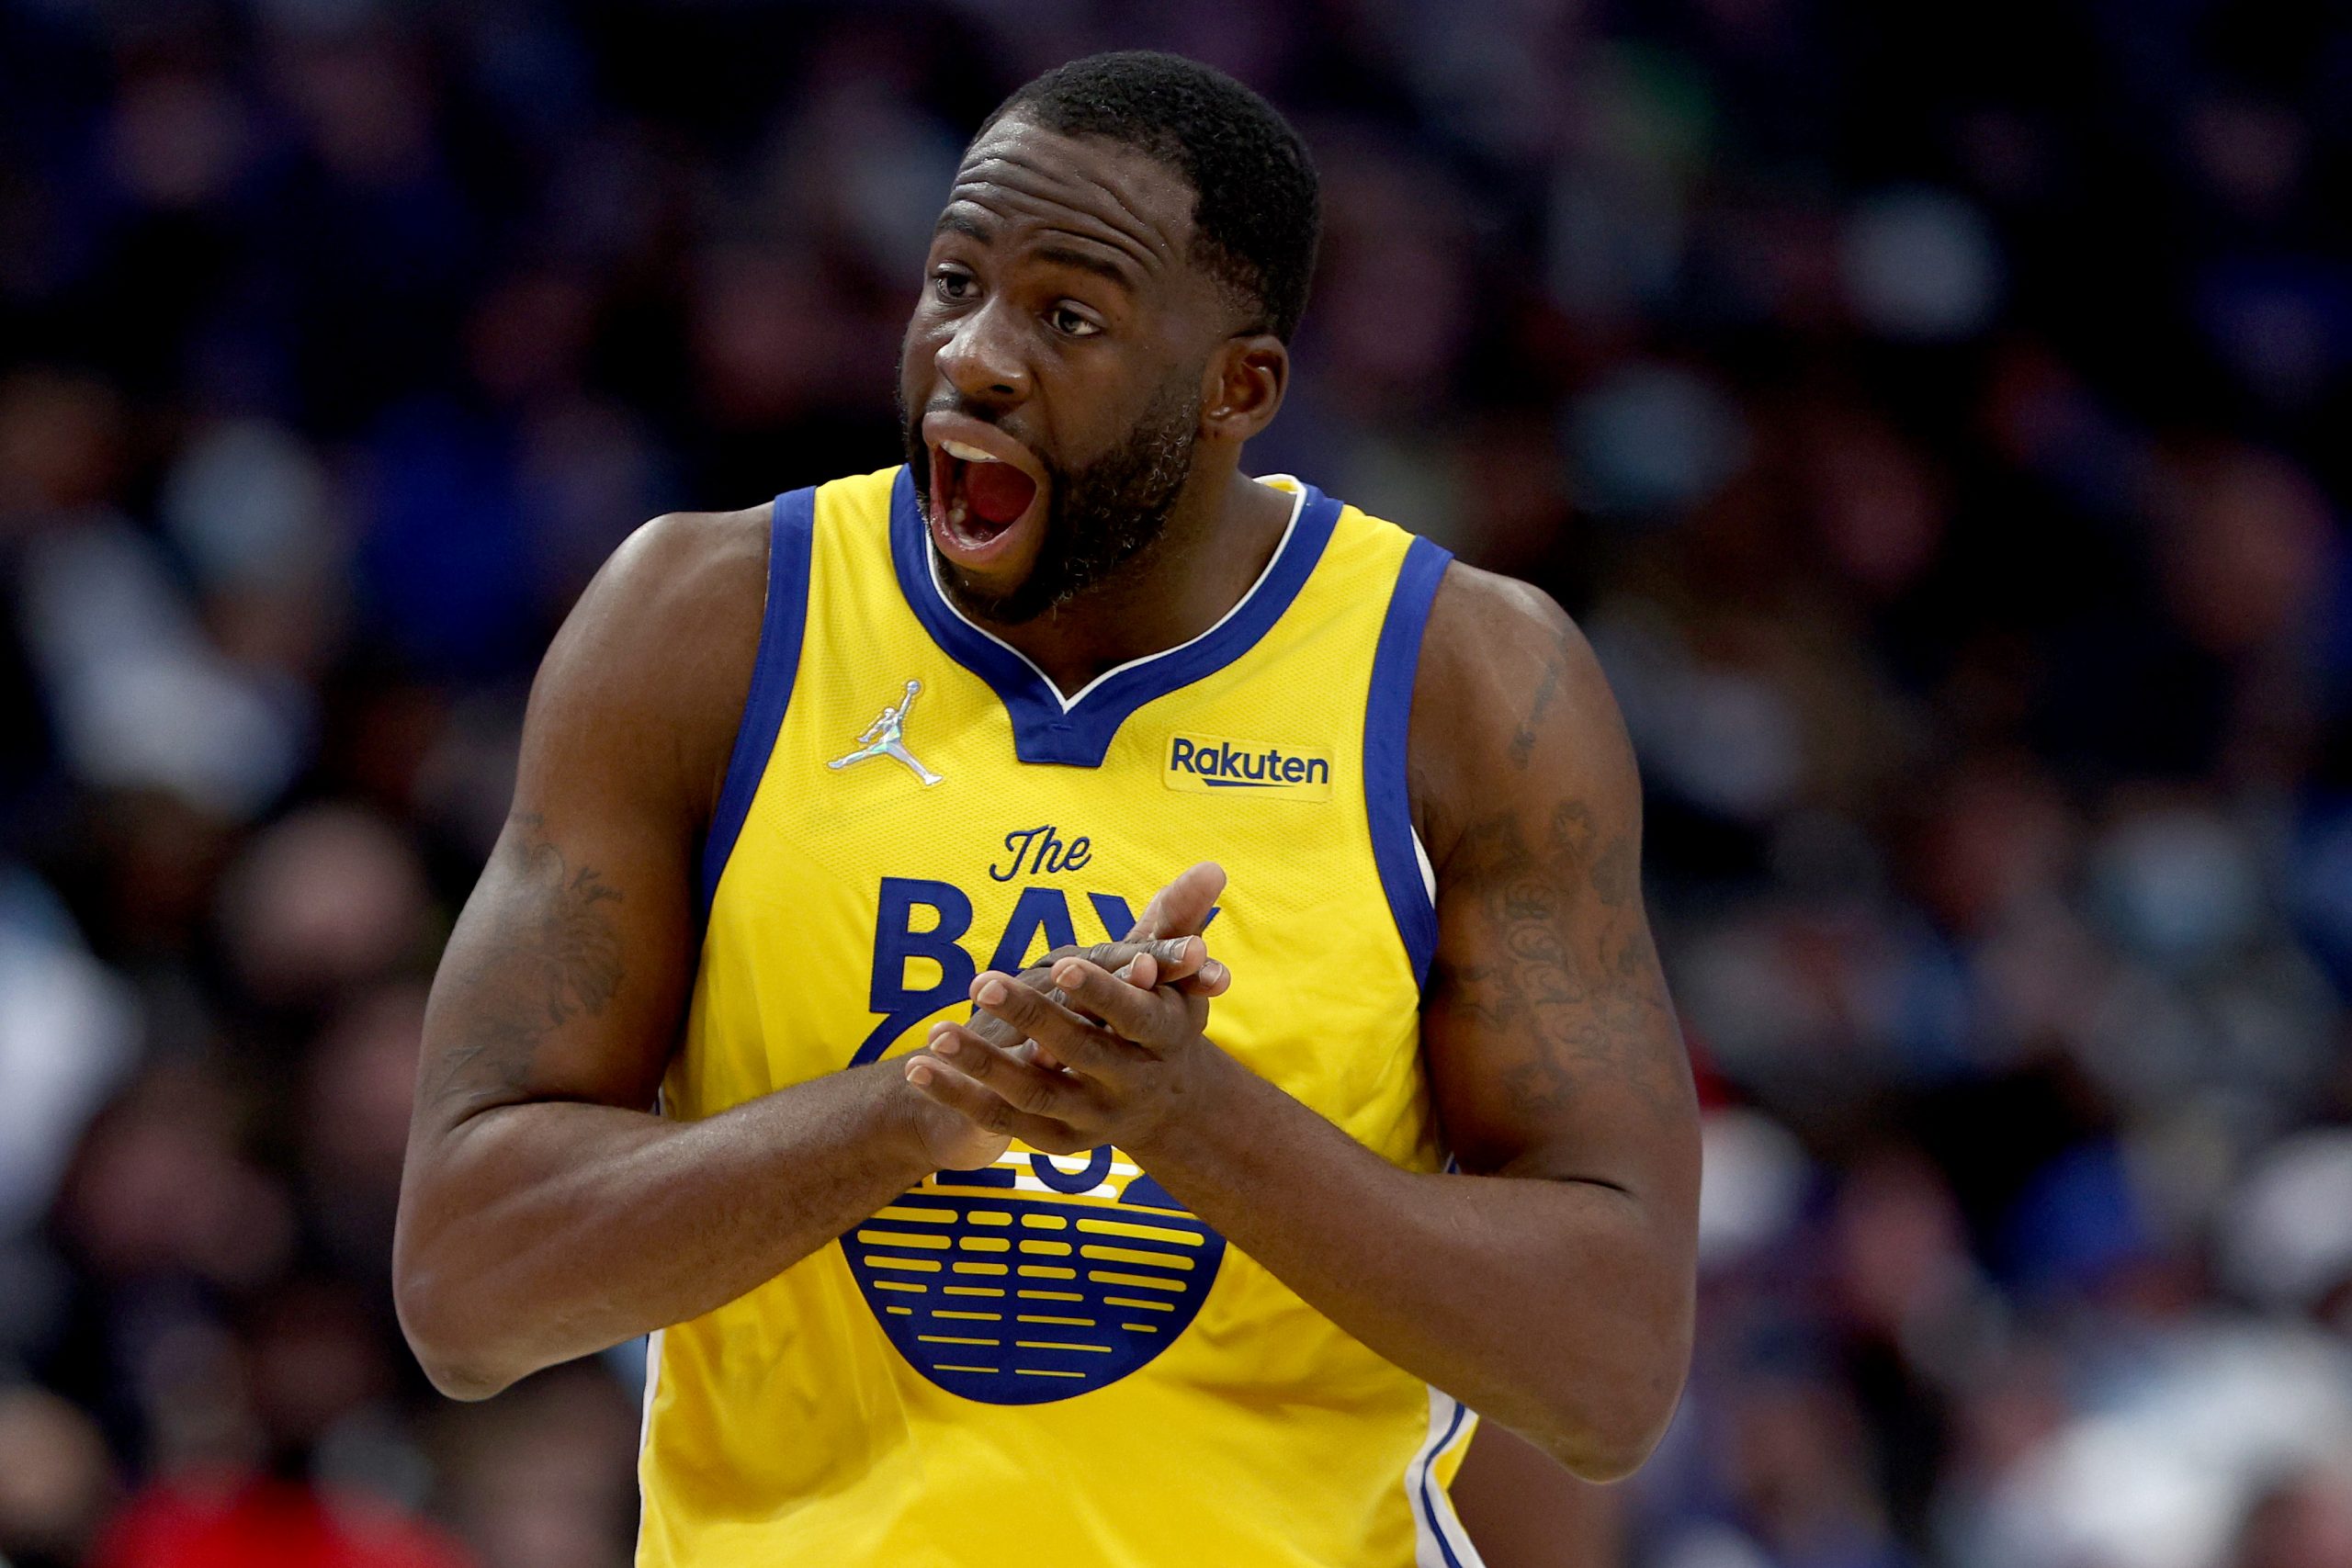 DALLAS, TEXAS - JANUARY 05: Draymond Green #23 of the Golden State Warriors reacts after being foul...